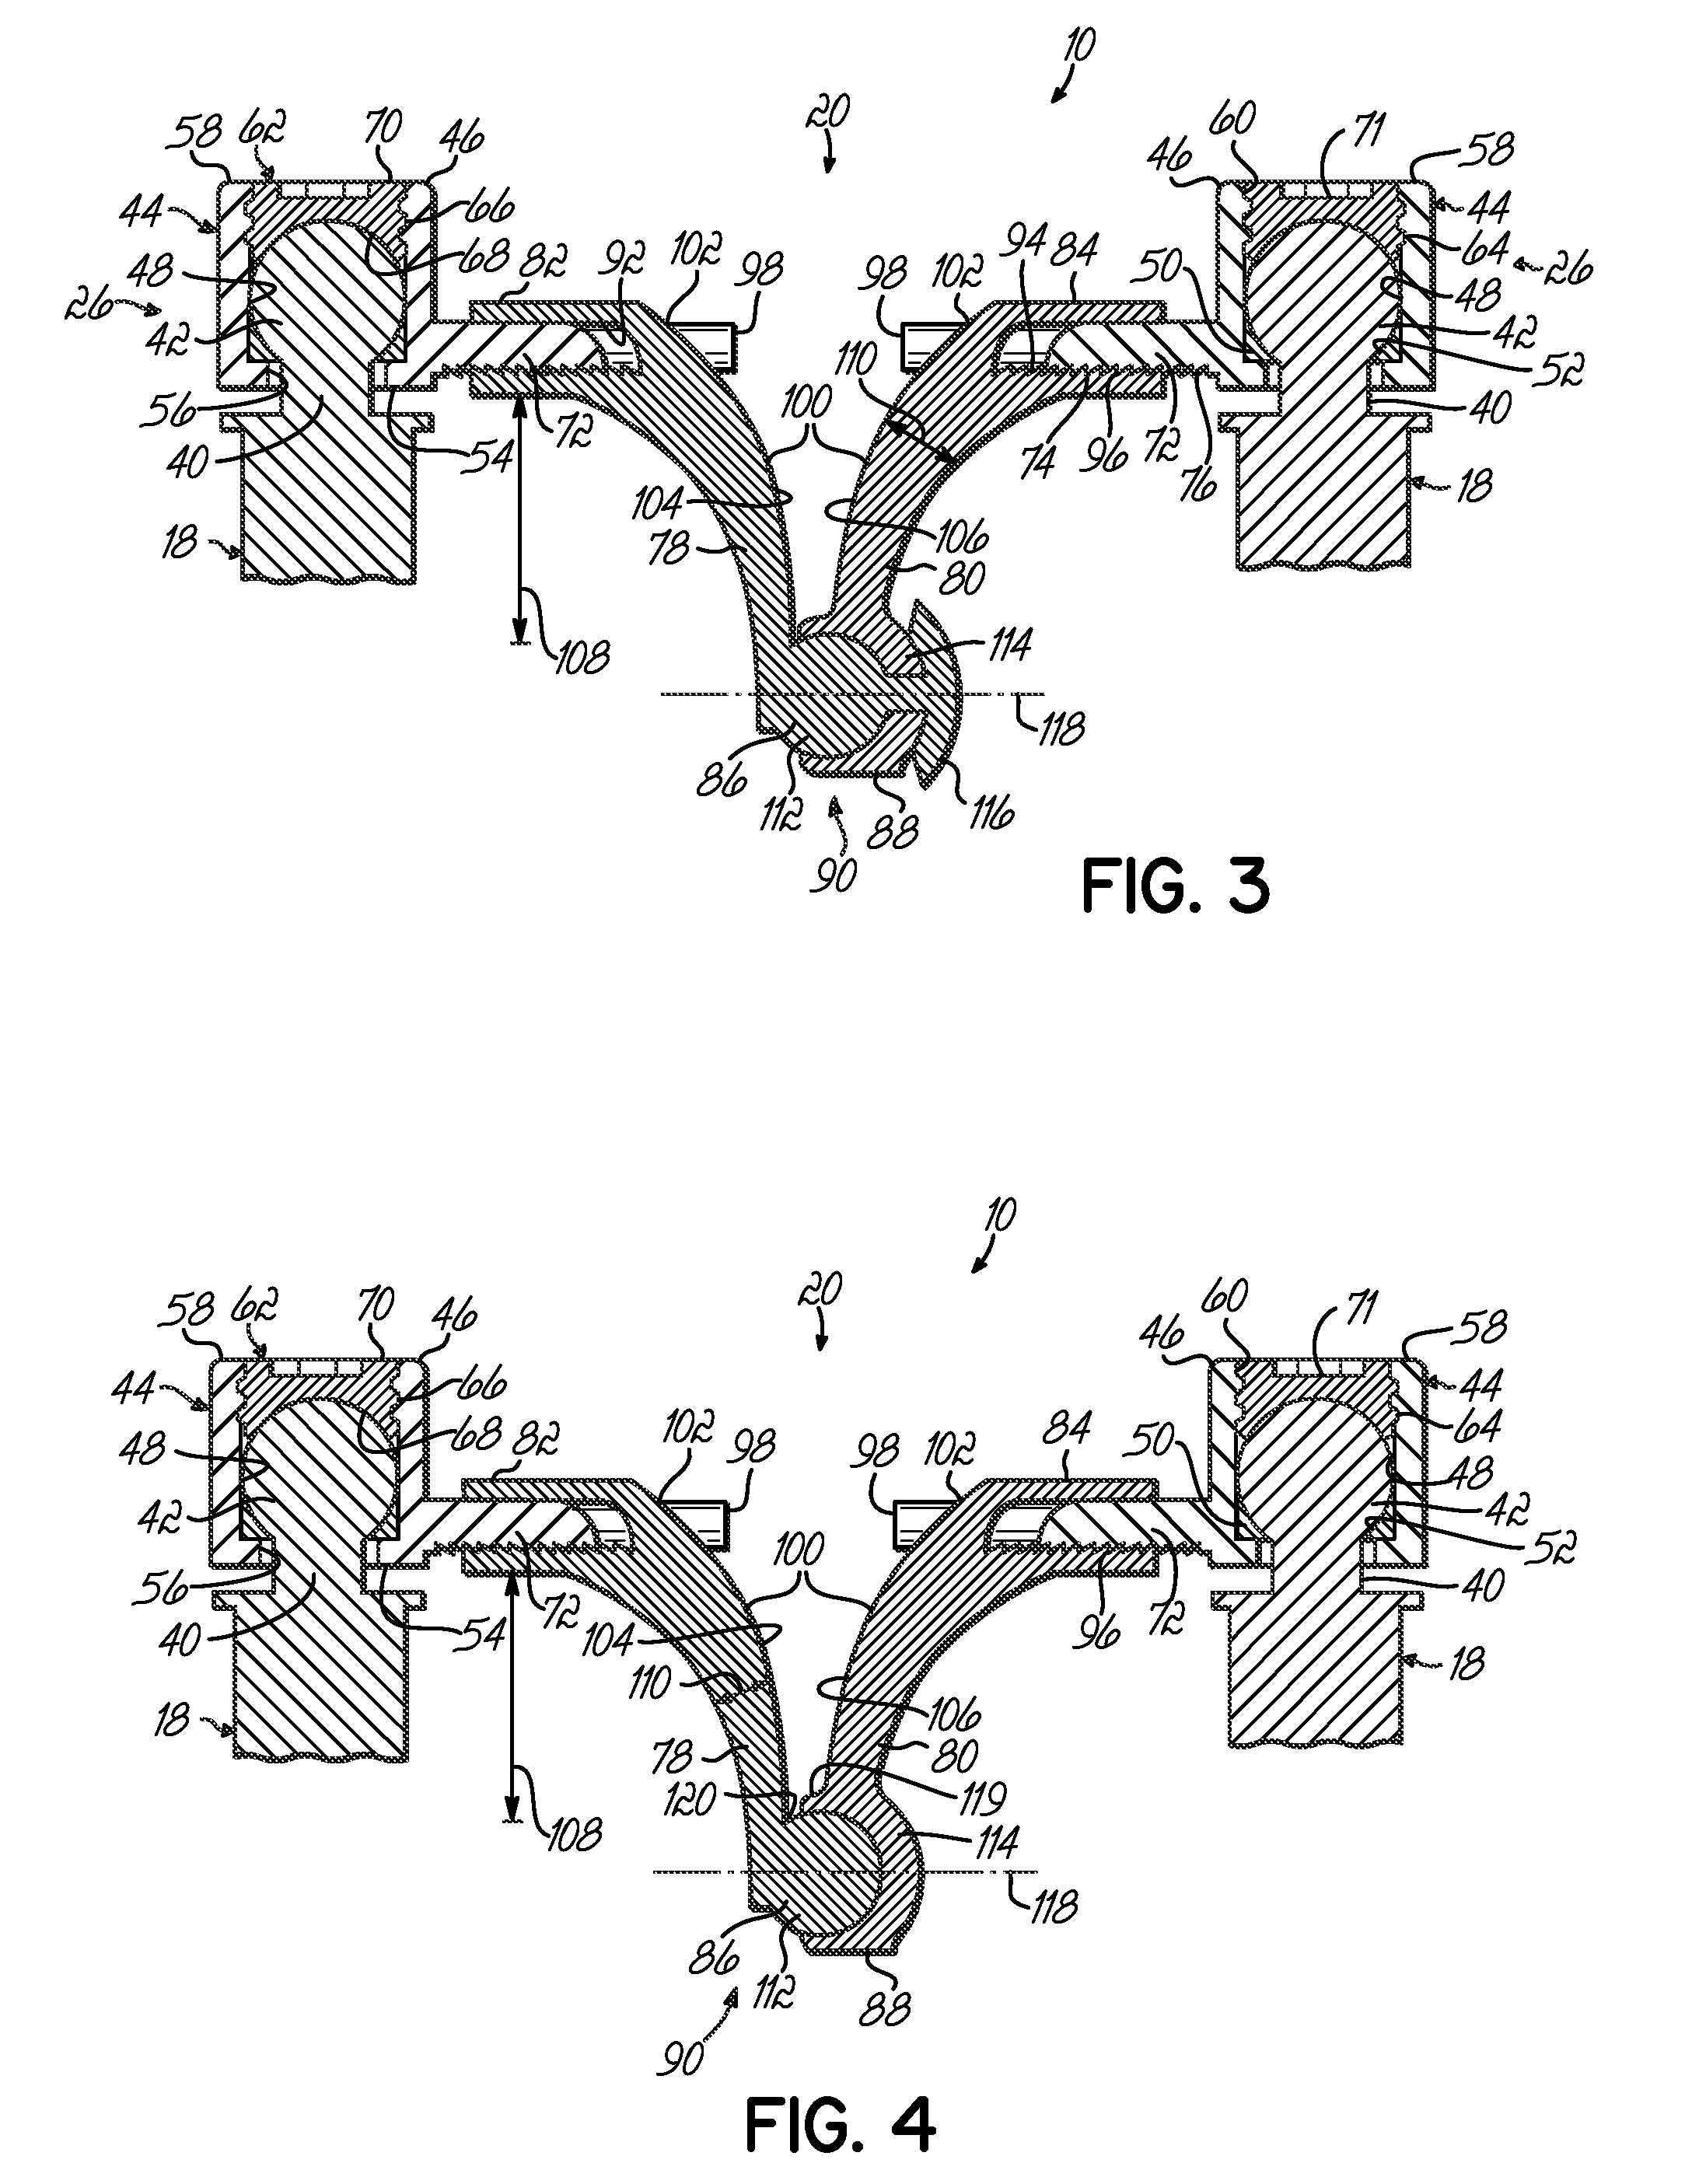 Dynamic spinal stabilization system and method of using the same